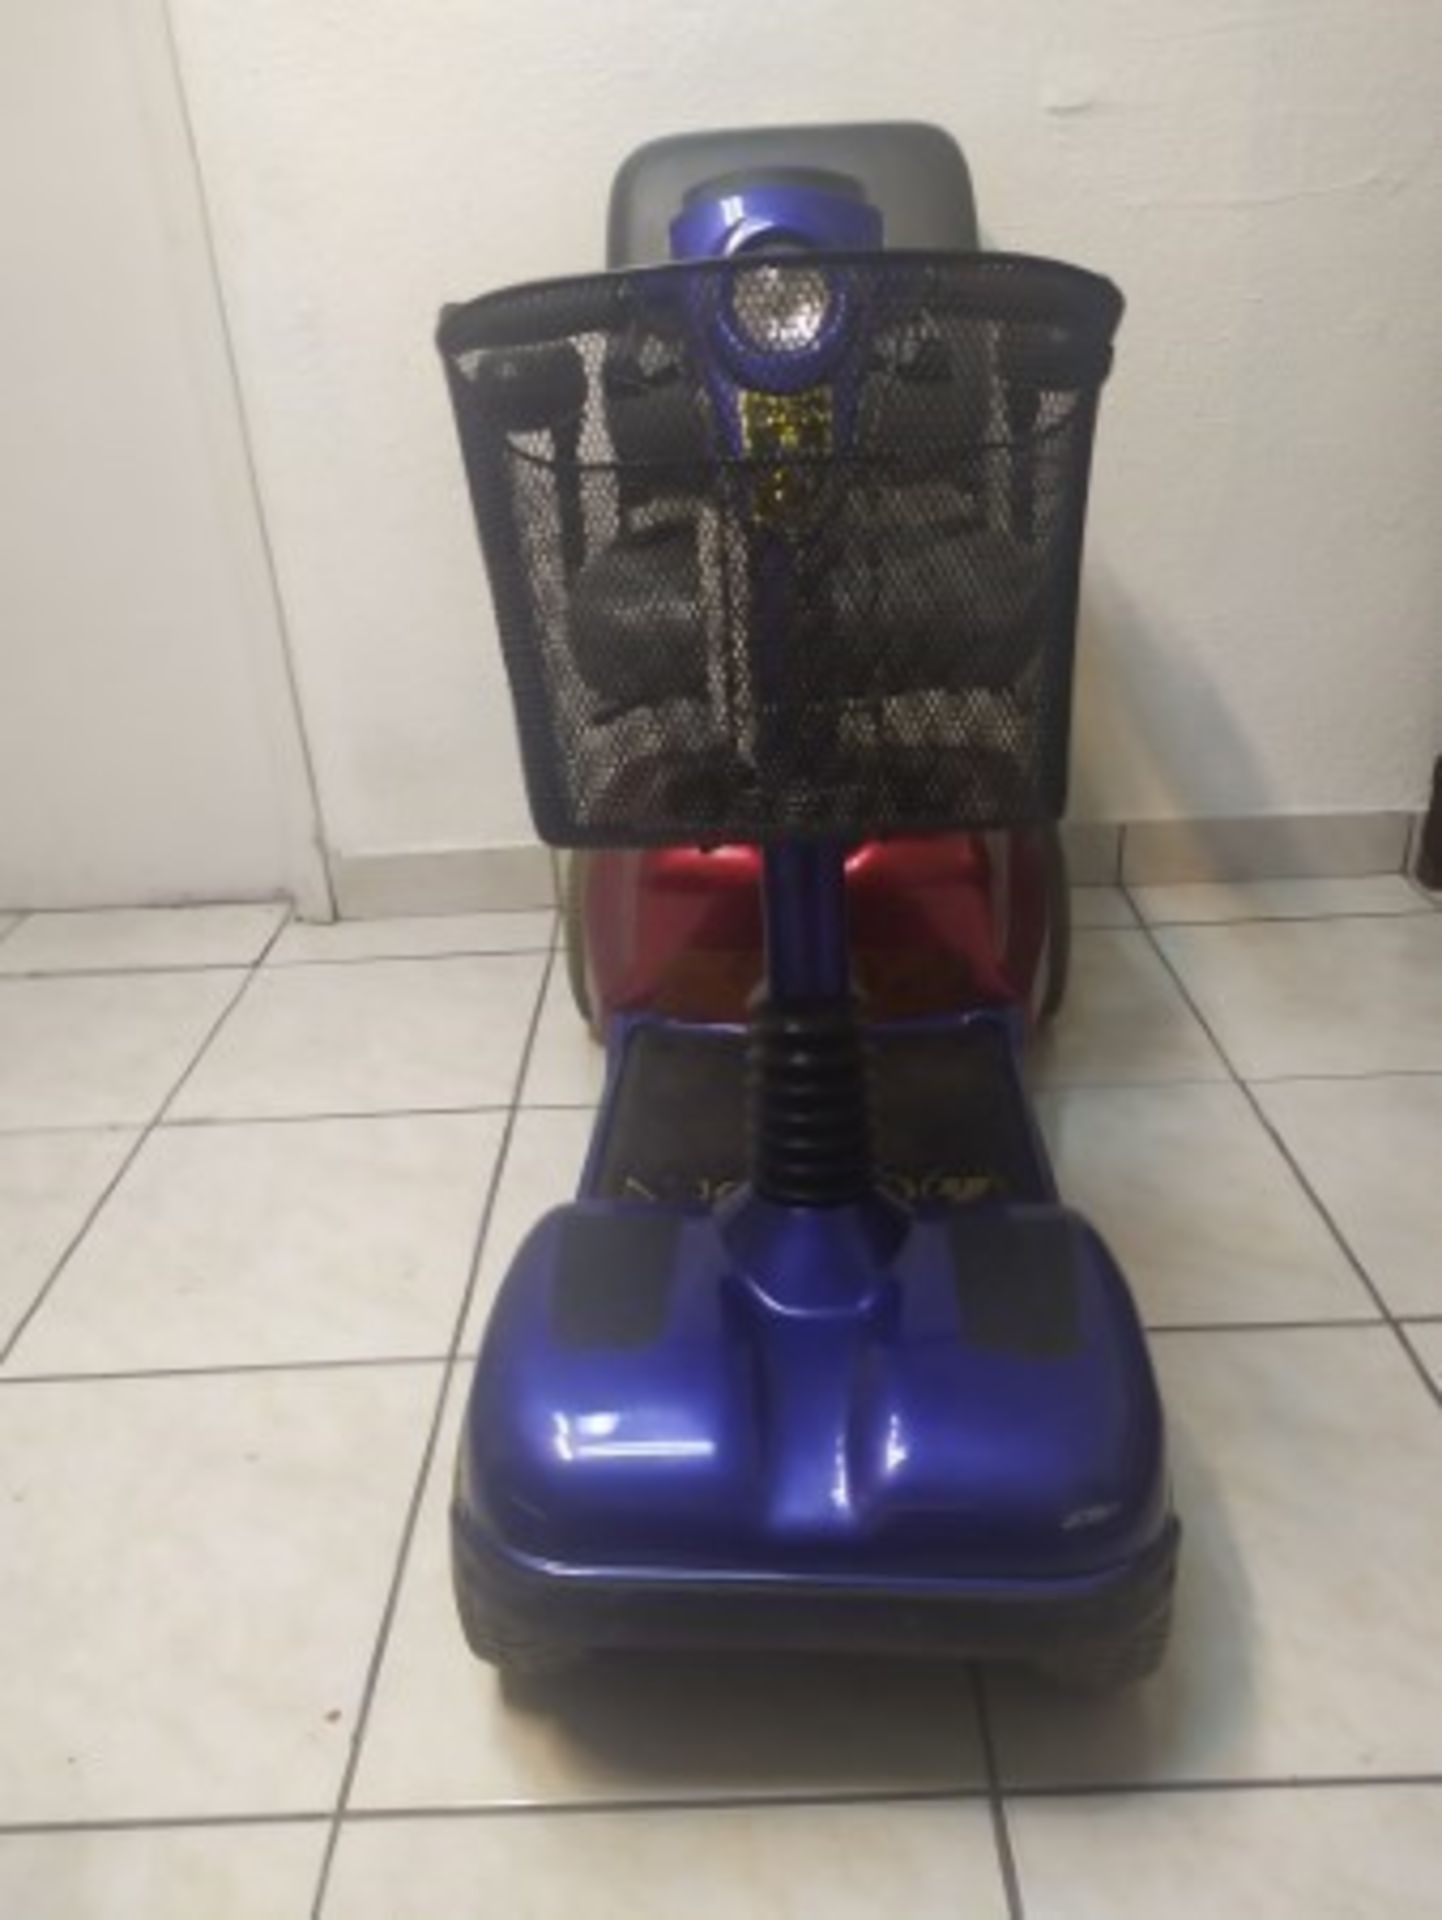 2019 GOLDEN COMPANION GC421 4-WHEEL SCOOTER WITH BUILT-IN CHARGER, BASKET & BATTERY - BLUE / RED - 4 - Image 3 of 5